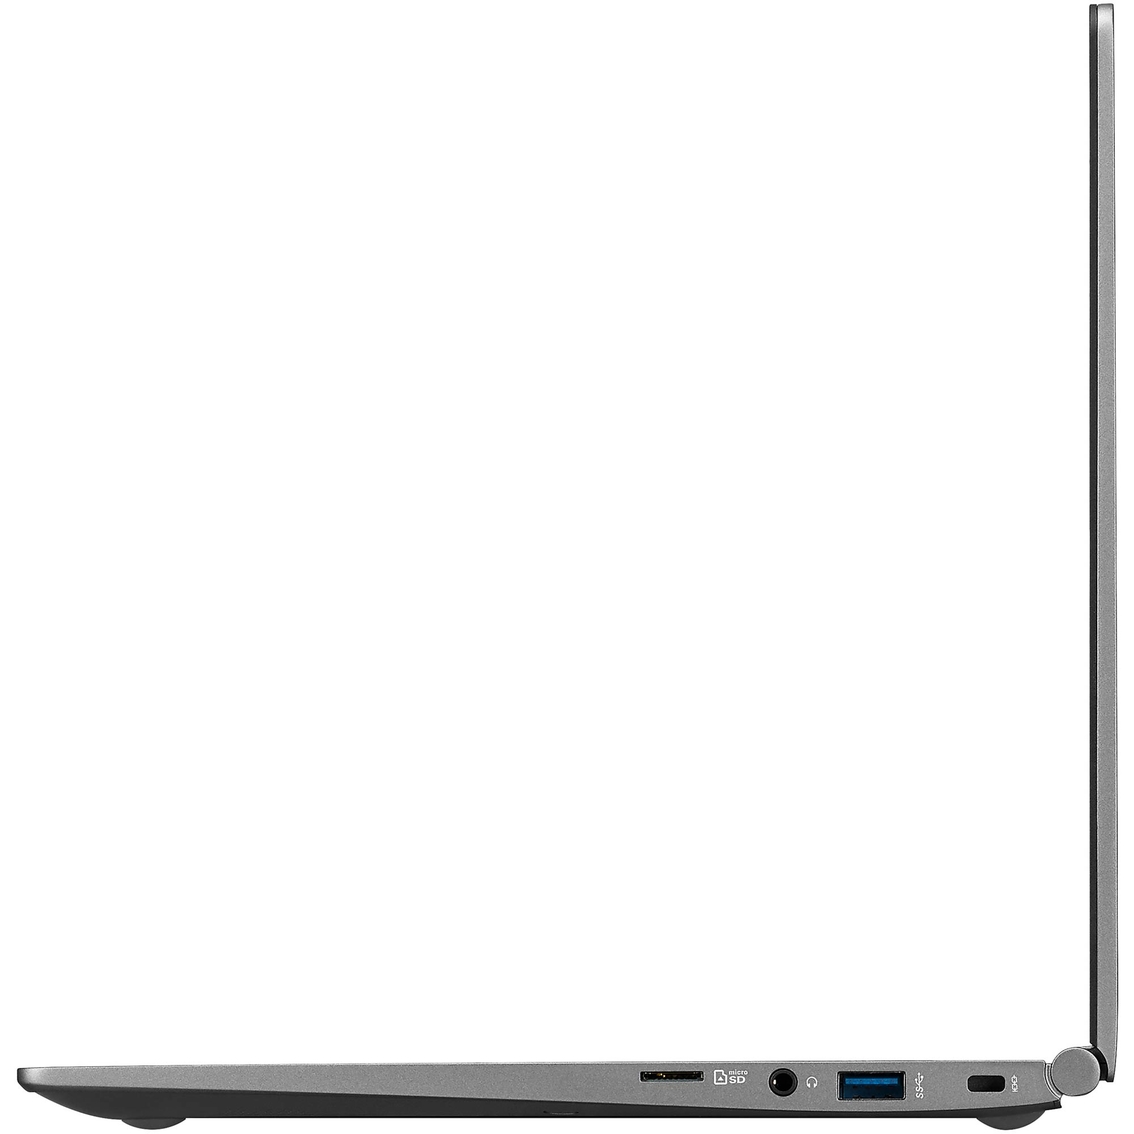 LG Gram 14 in. Intel Core i7 1.8GHz 16GB RAM 256GB SSD Touchscreen Notebook - Image 5 of 6